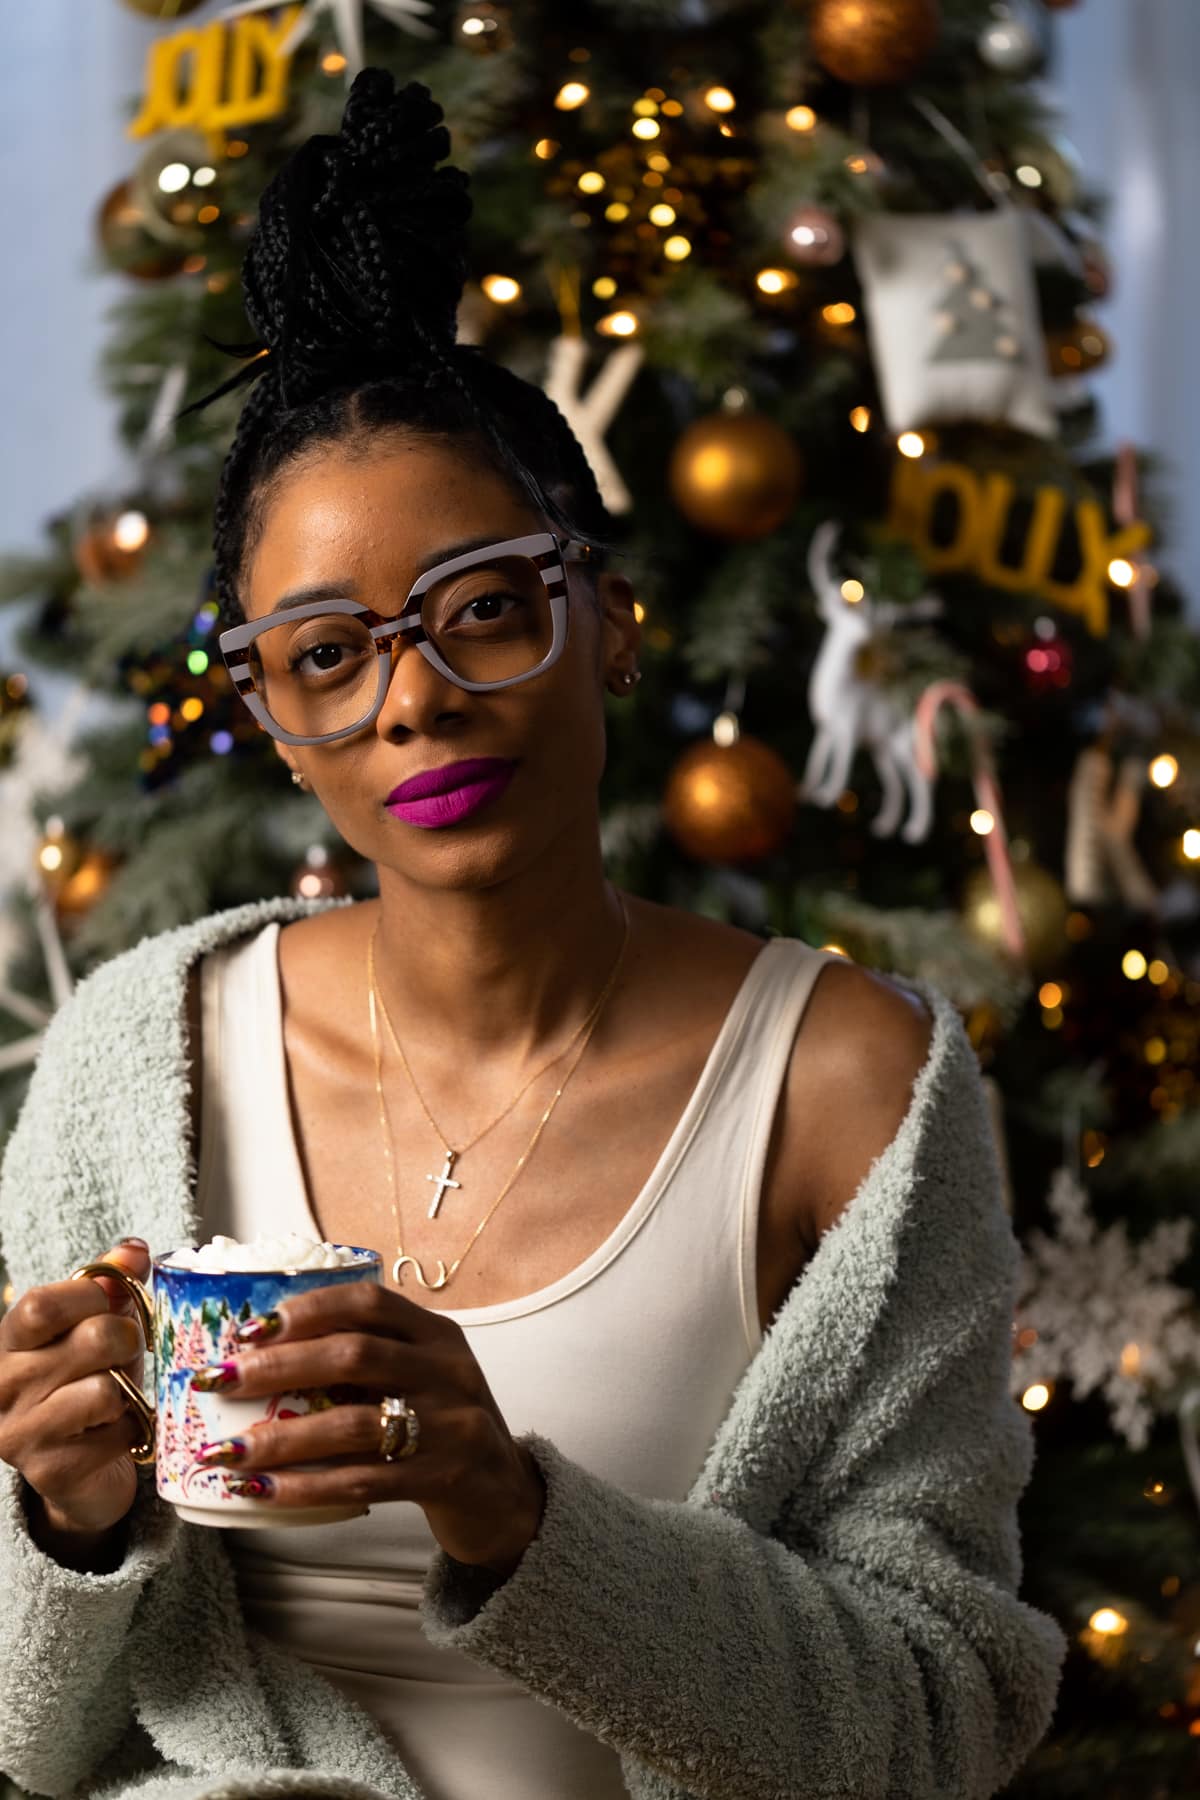 Shanika in front of a Christmas tree holding a mug.